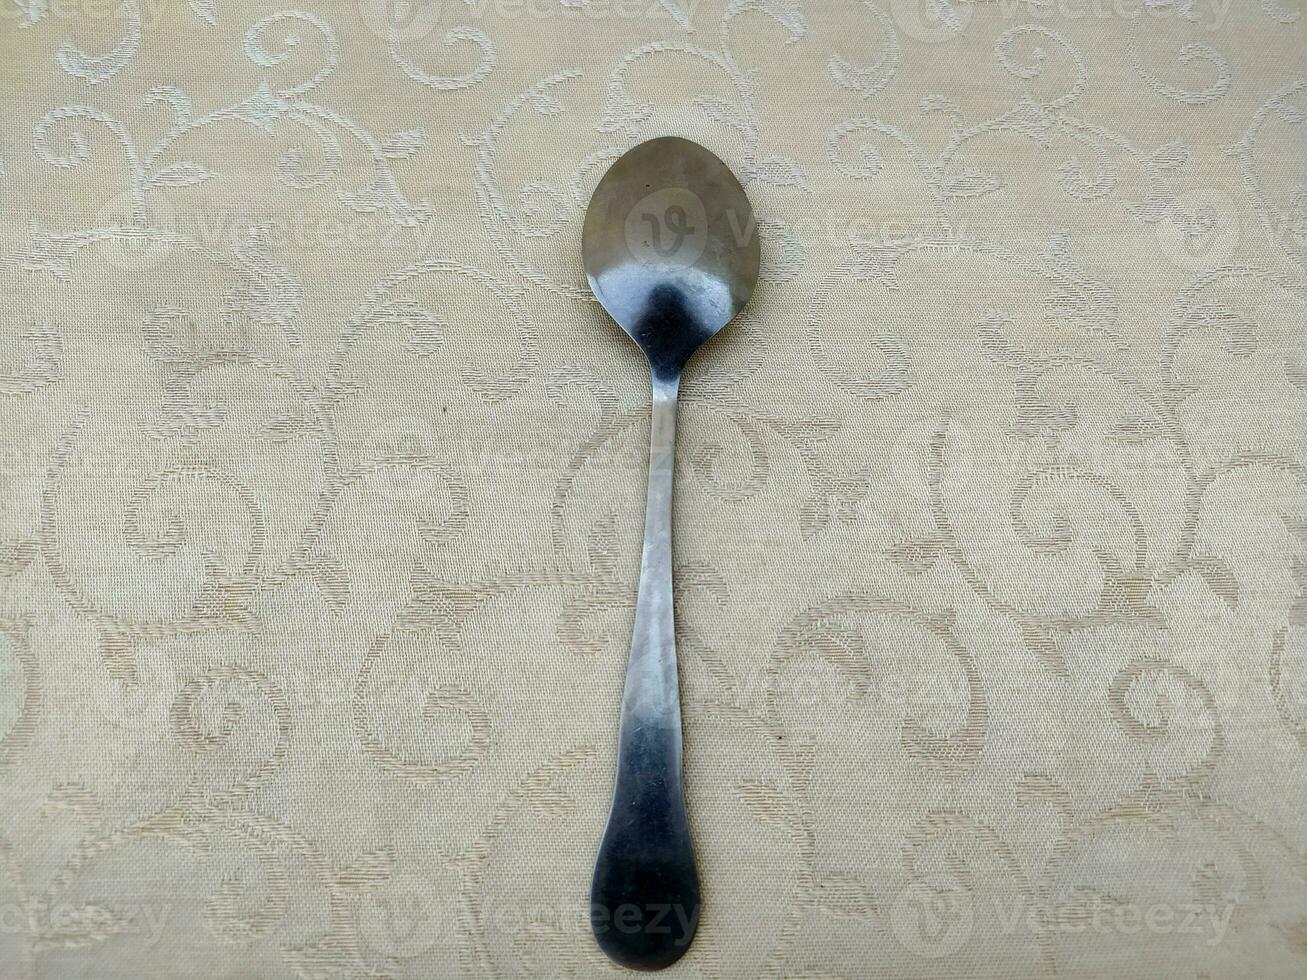 several aluminum spoons arranged uniquely on the table photo